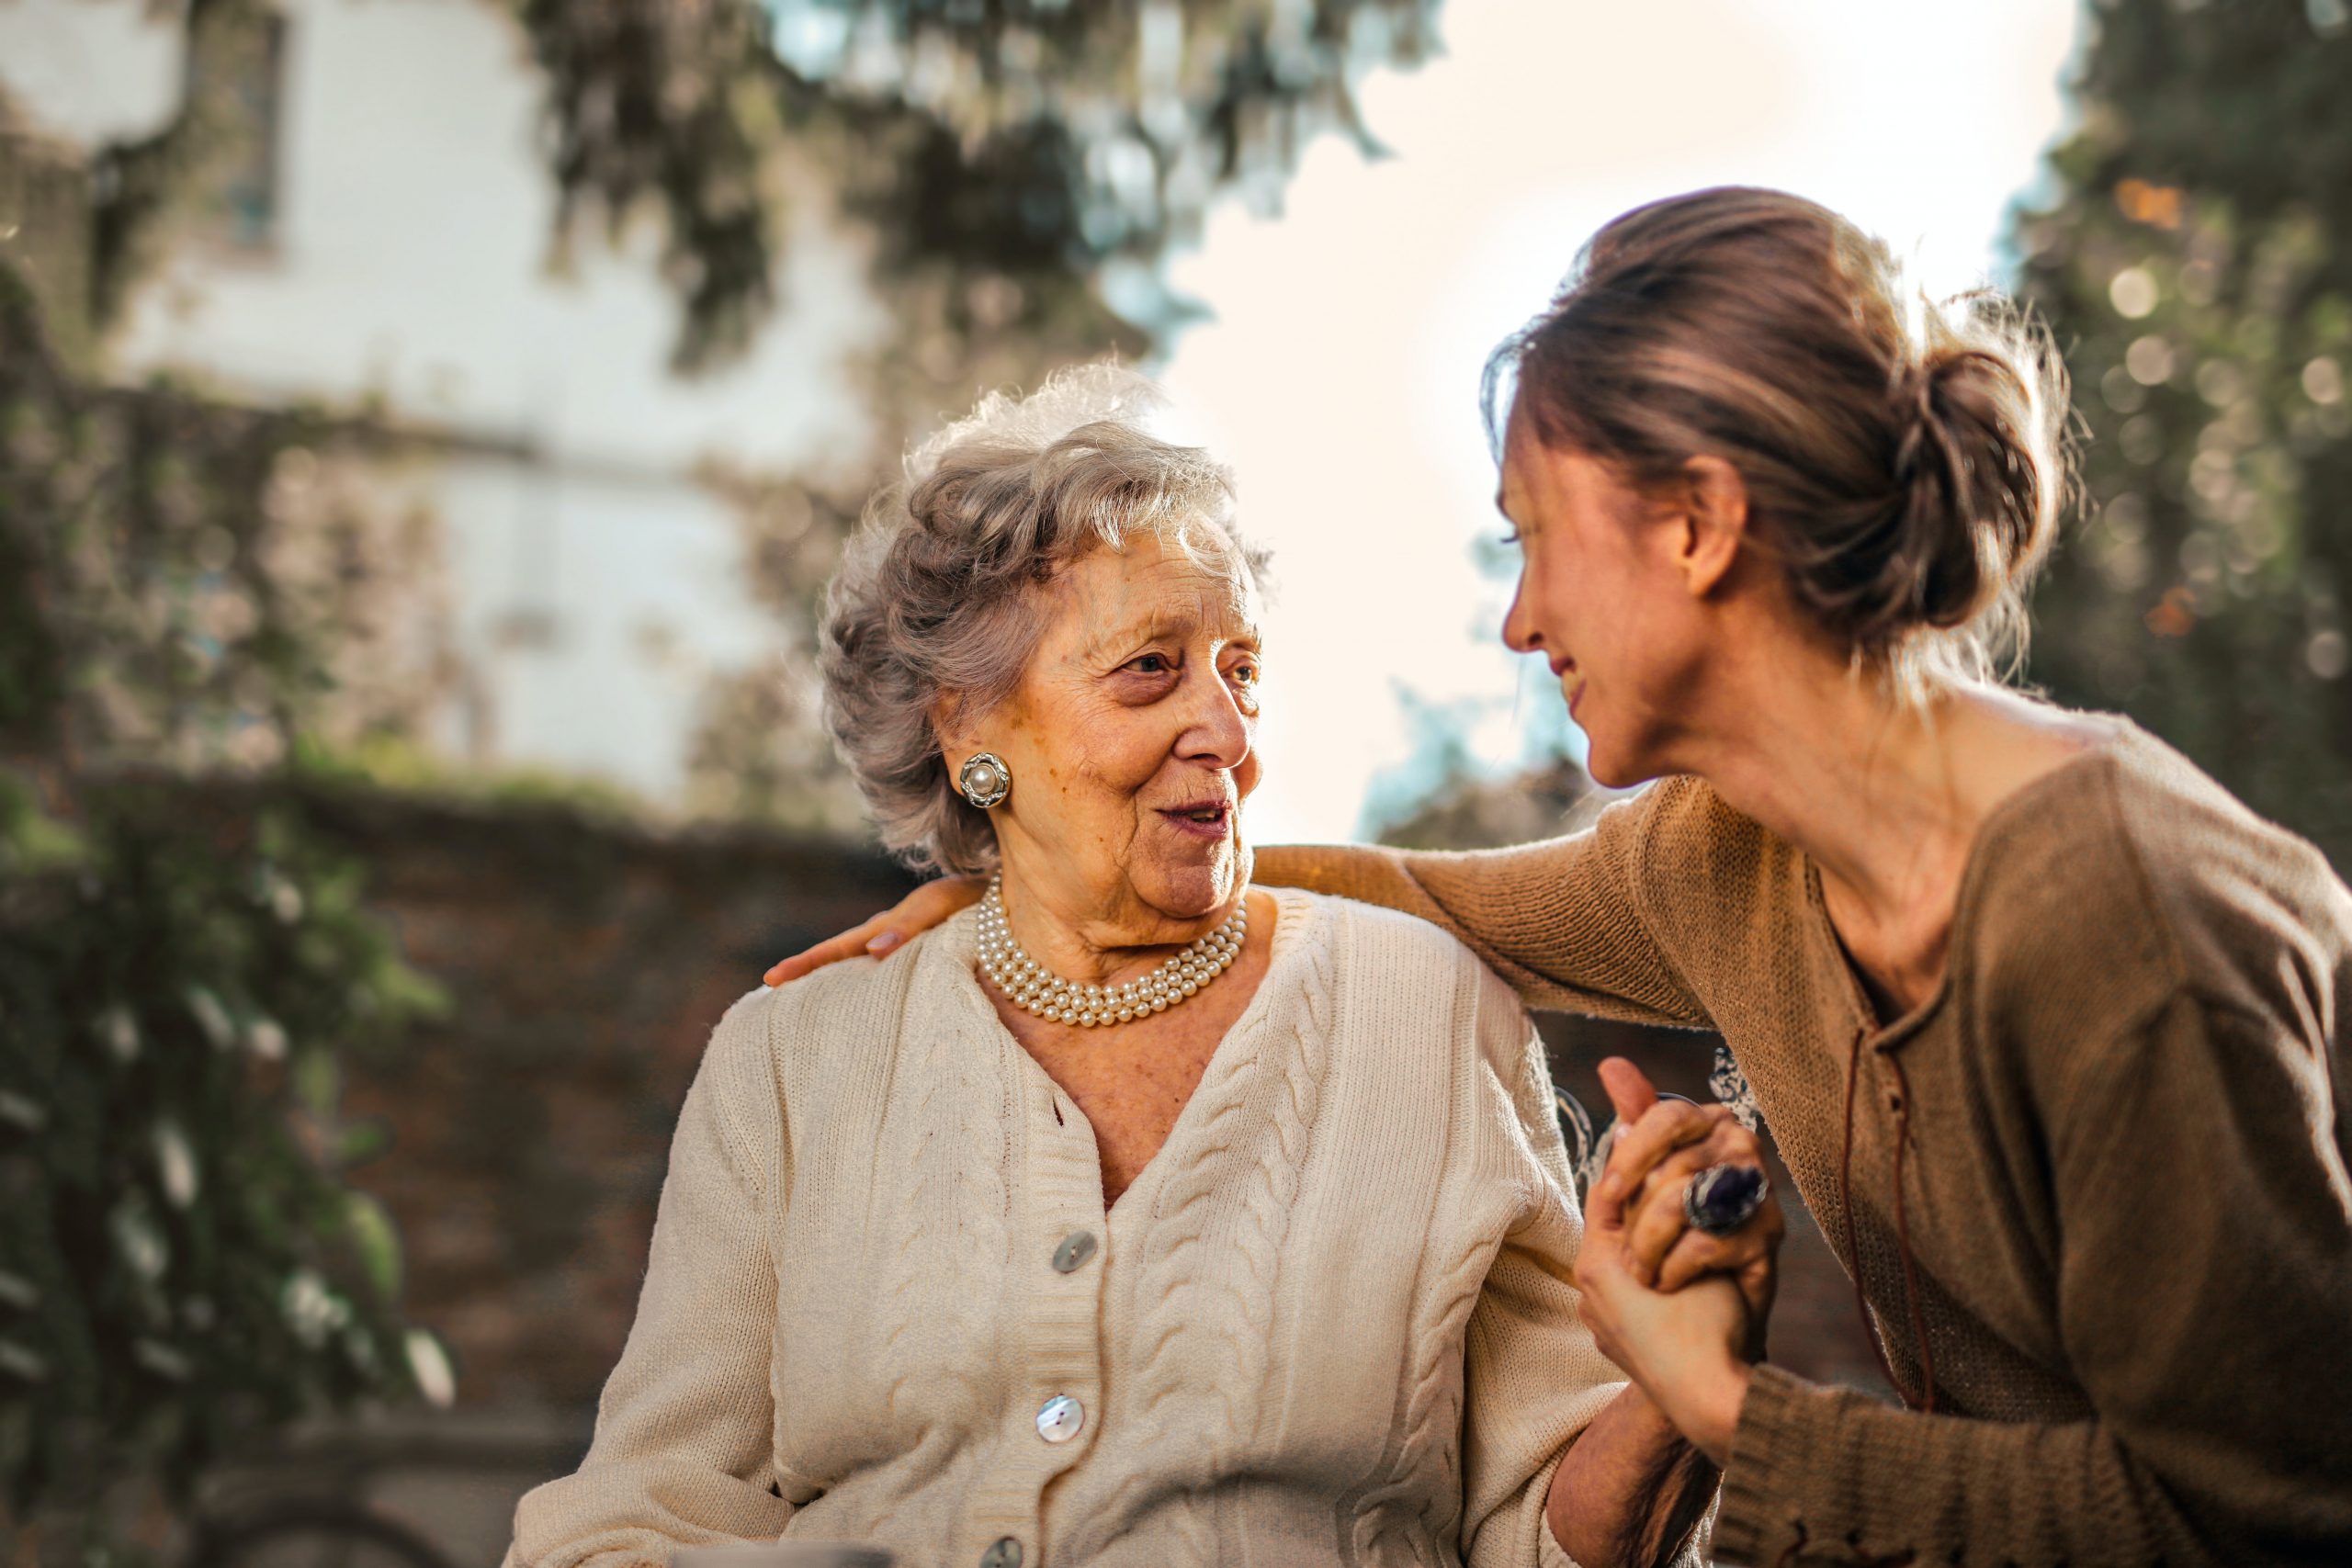 An elderly woman conversing and sharing a moment with a younger woman outdoors. 